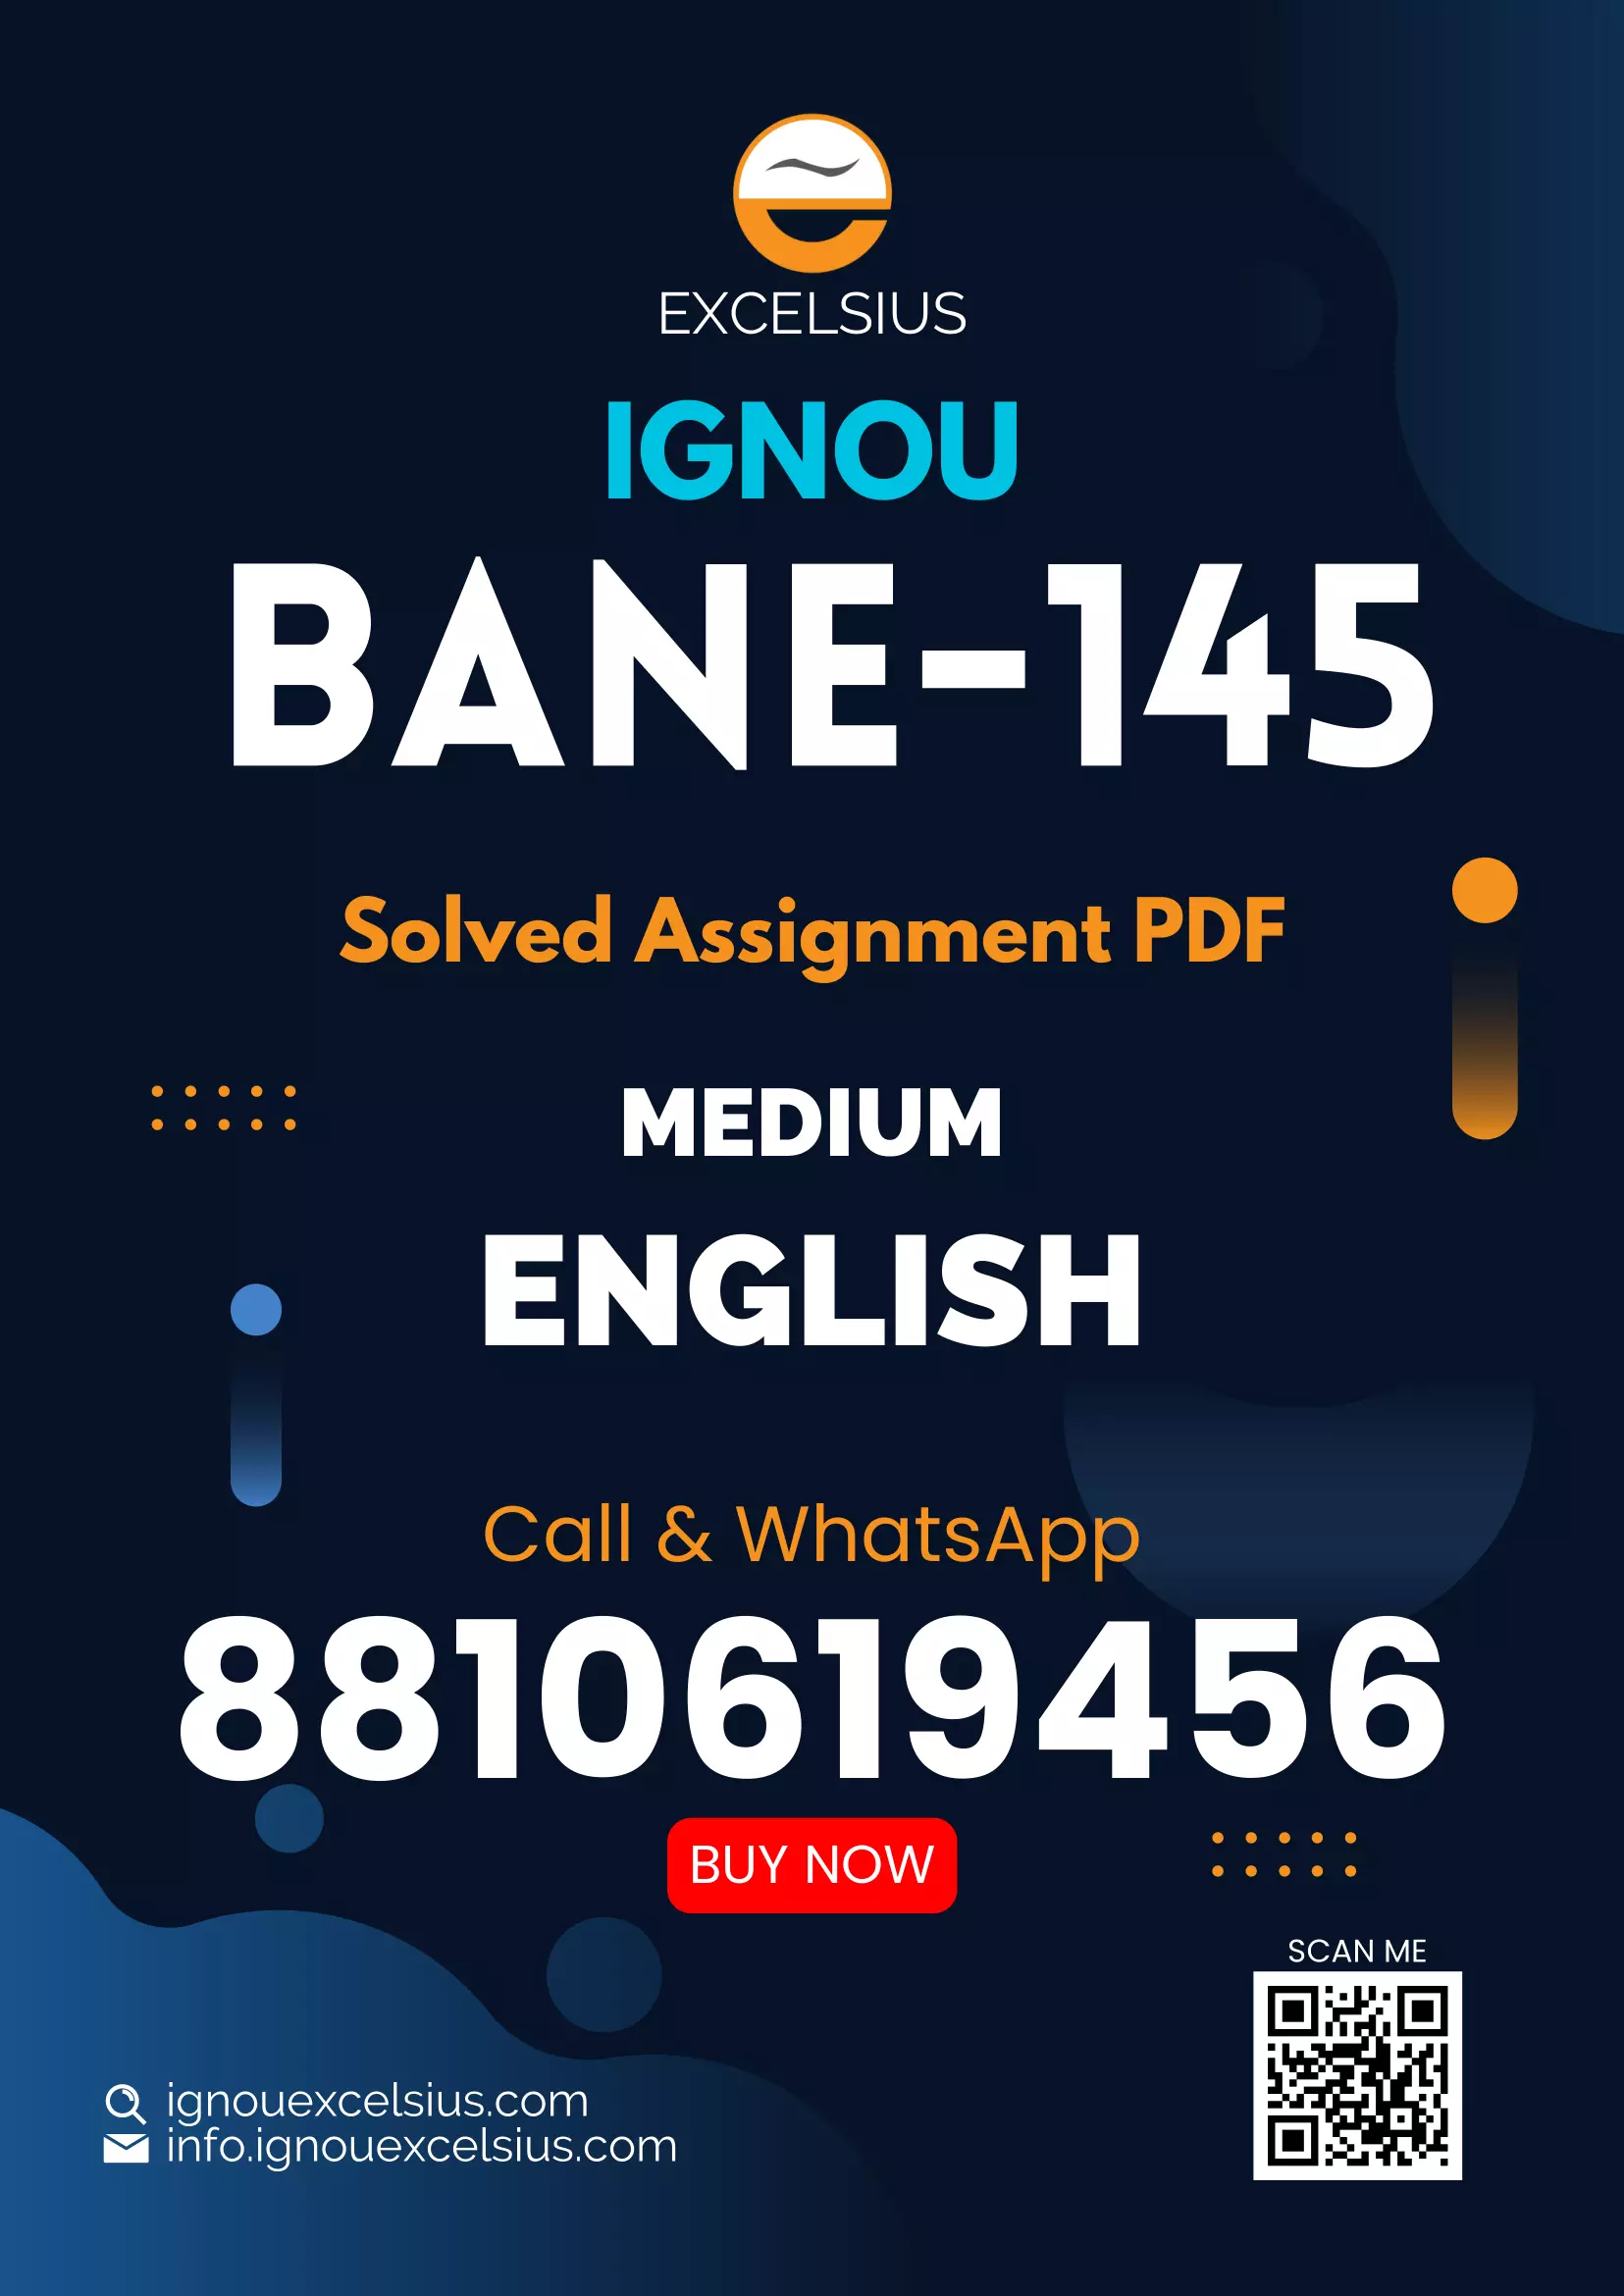 IGNOU BANE-145 - Applied Anthropology, Latest Solved Assignment-July 2022 – January 2023